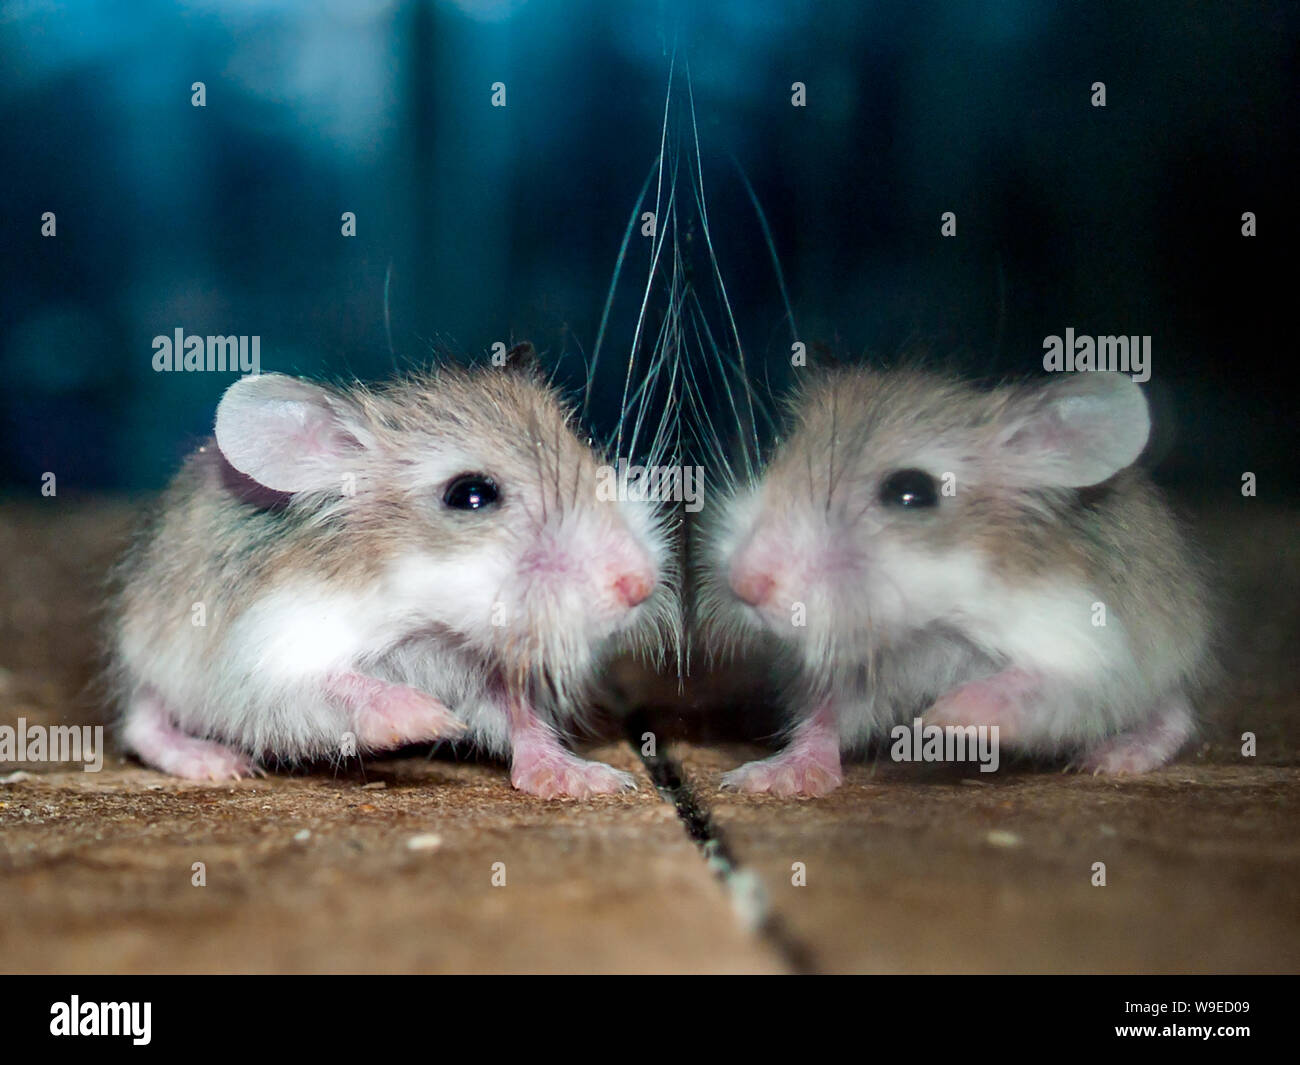 A very young, small Roborovski dwarf hamster with very long whiskers running alongside a glass panel that shows it's reflection. Phodopus Roborovskii. Stock Photo